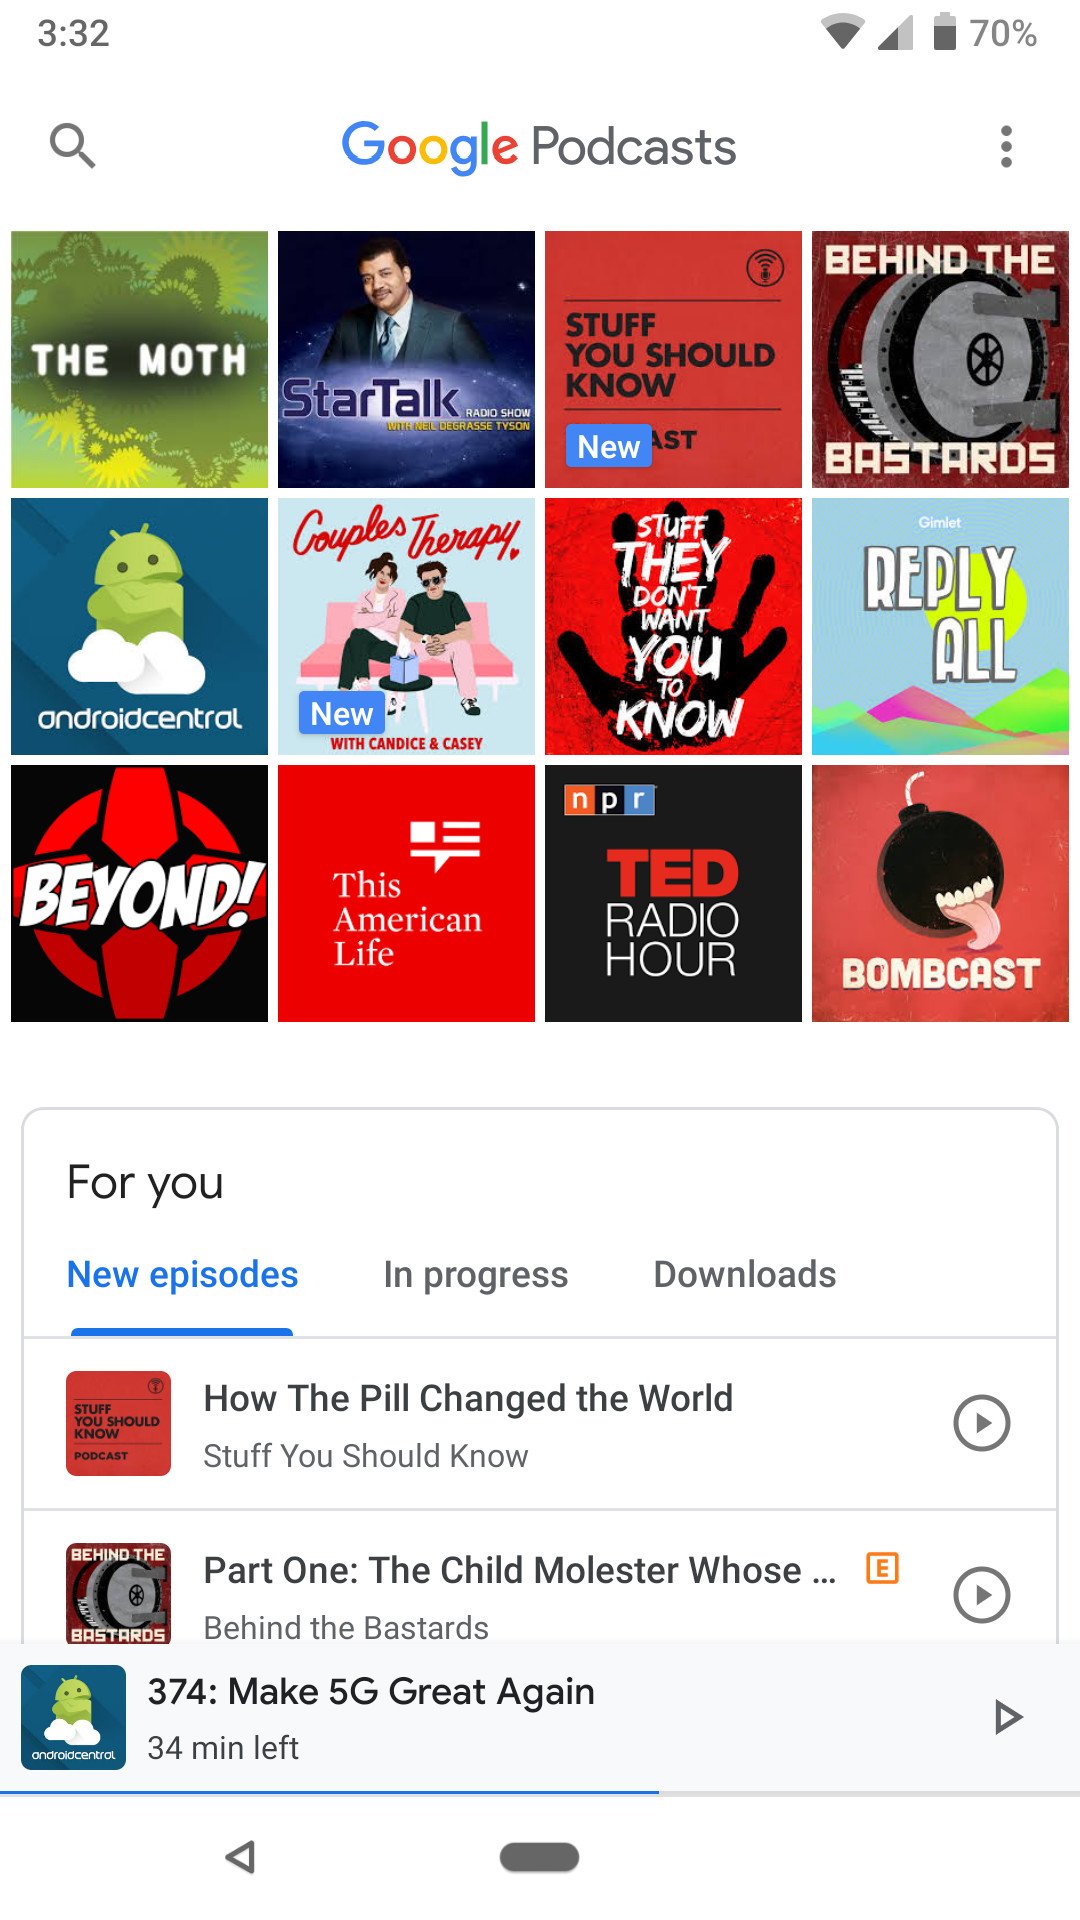 google-podcasts-how-to-use-1.jpg?itok=He